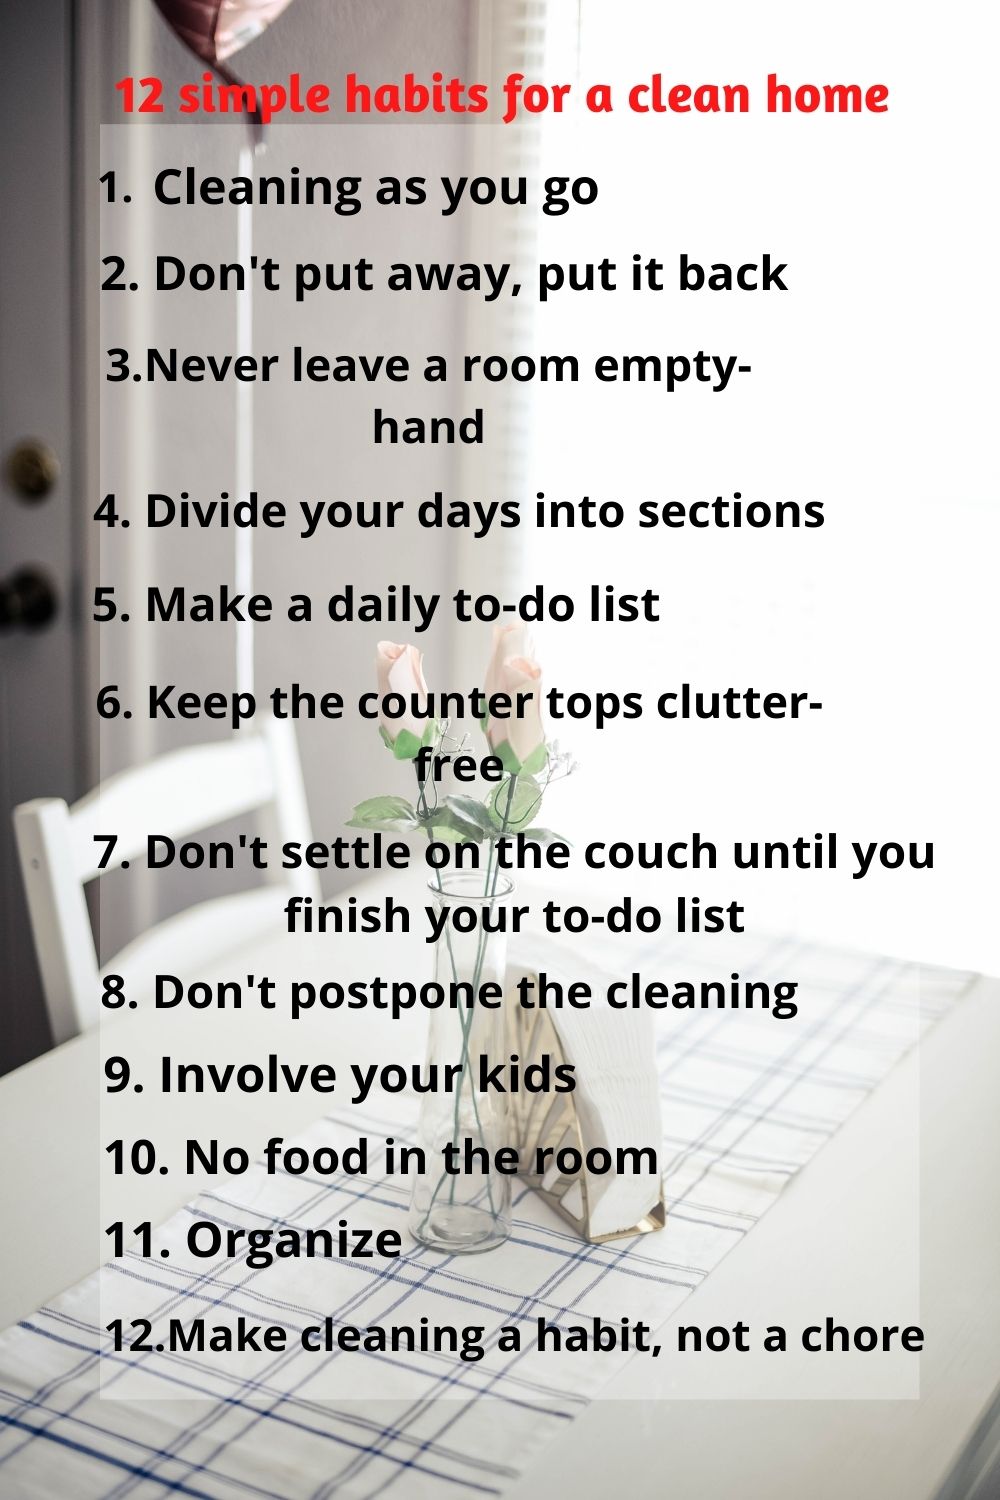 12 Things That Will Help Me Clean My House With the Least Effort